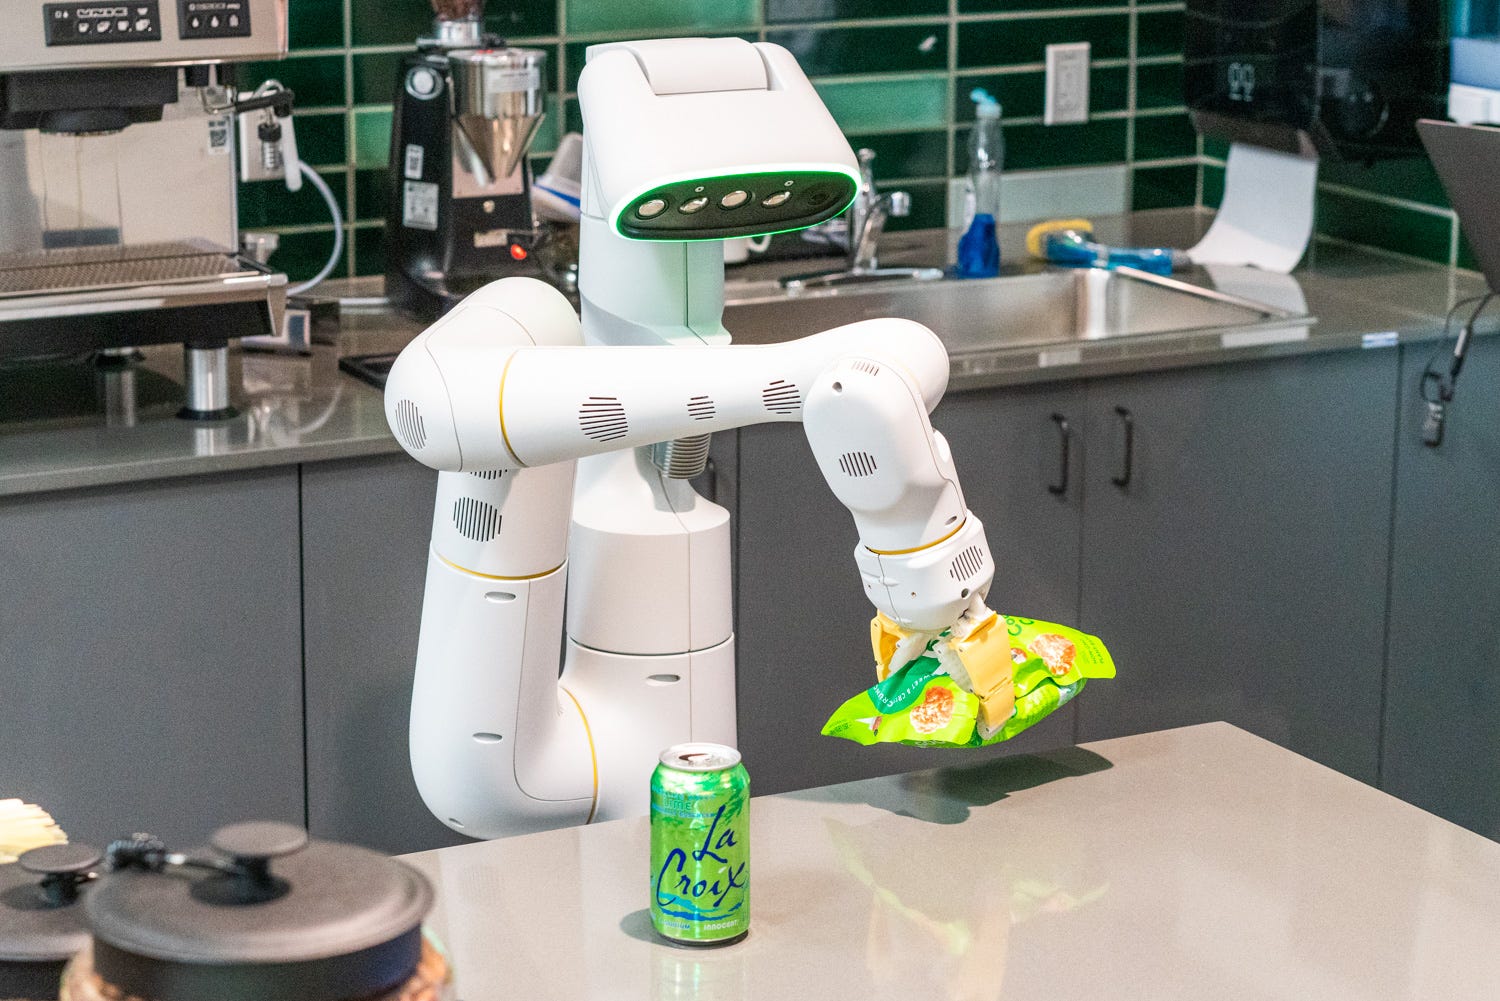 Google makes robots smarter by teaching them about their limitations |  TechCrunch